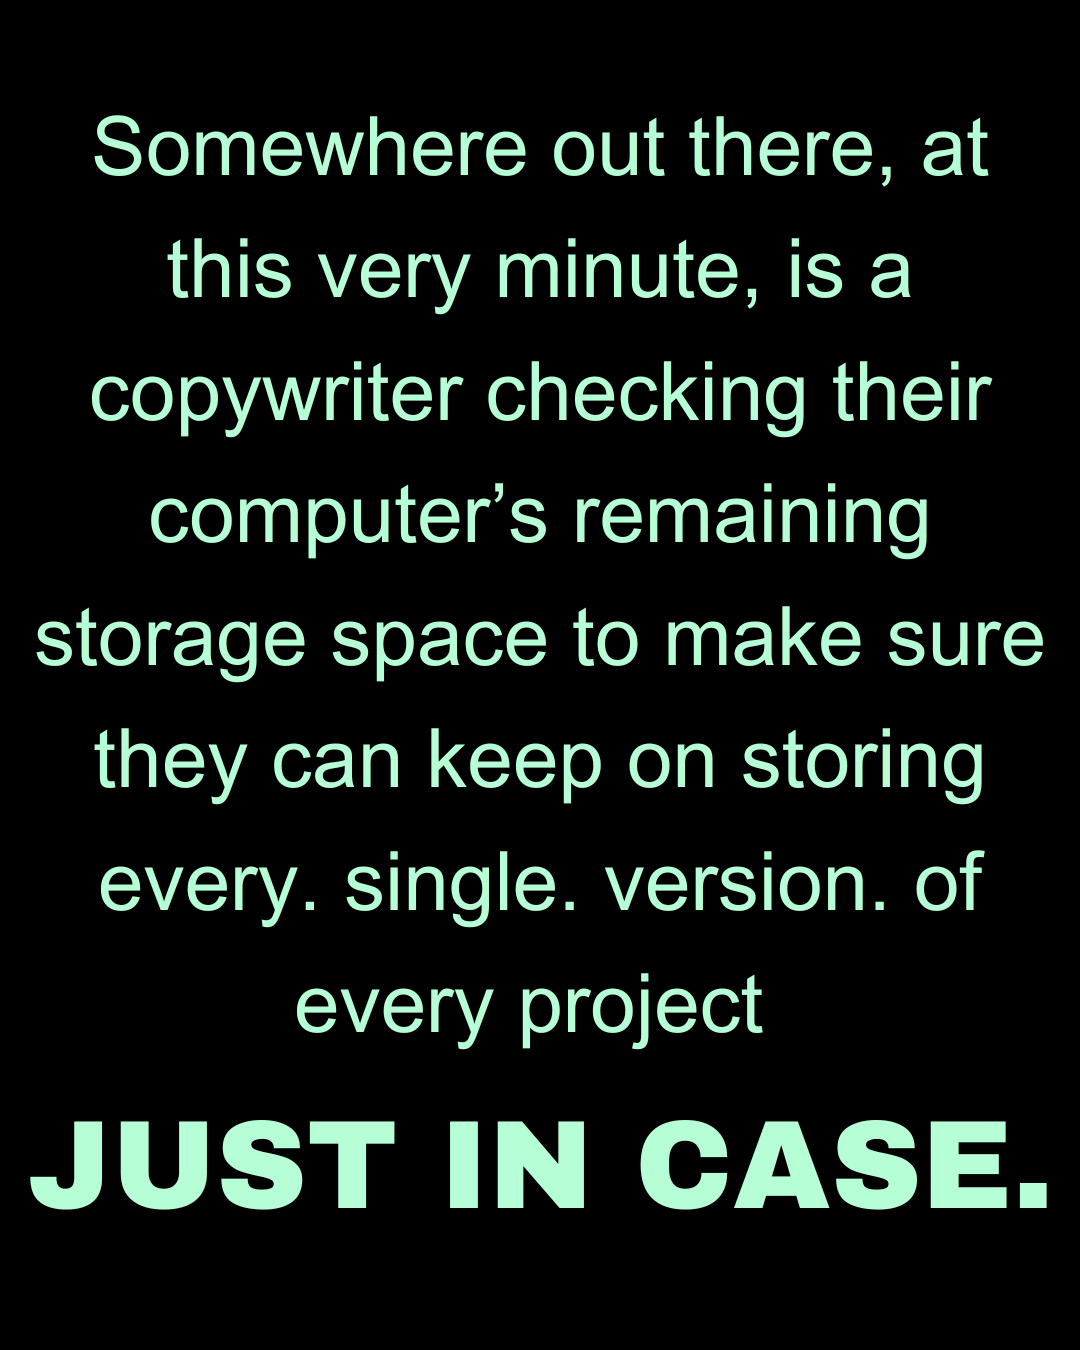 Somewhere out there, at this very minute, is a copywriter checking their computer's remaining storage space to make sure they can keep on storing every. single. version. of every project JUST IN CASE.